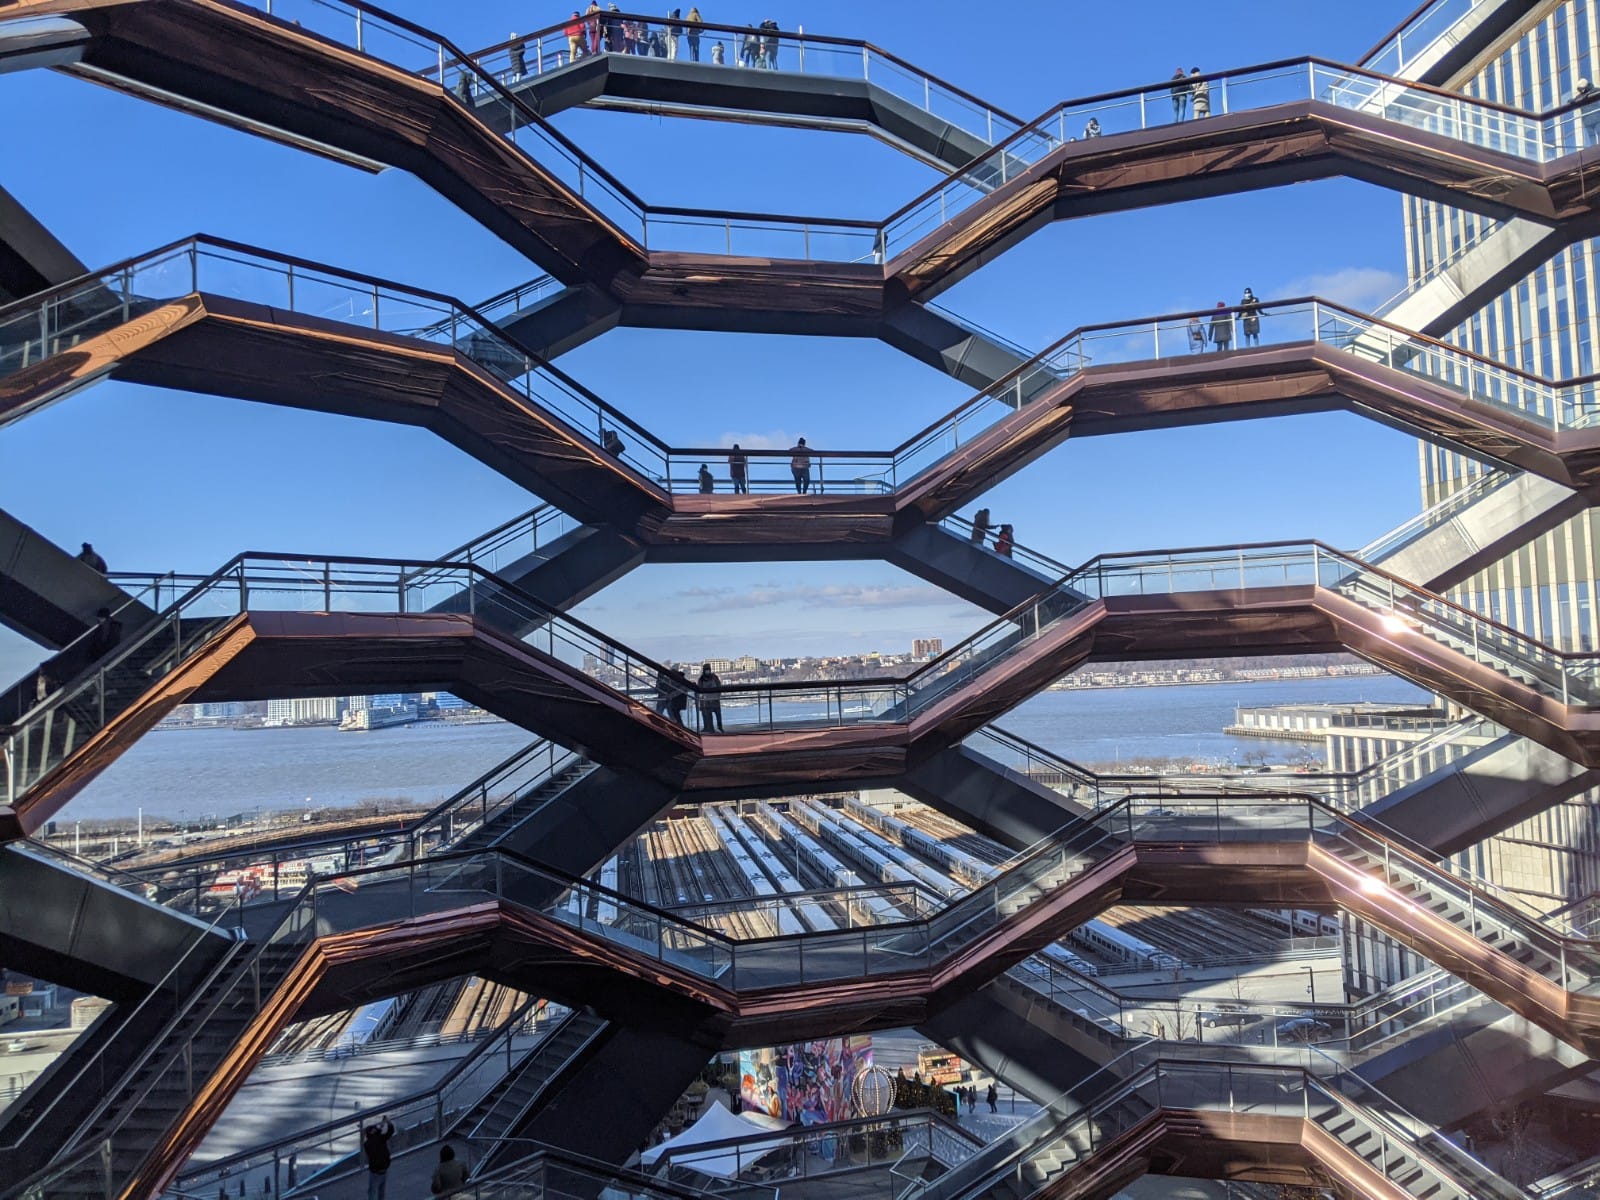 Vessel at Hudson Yards in NYC